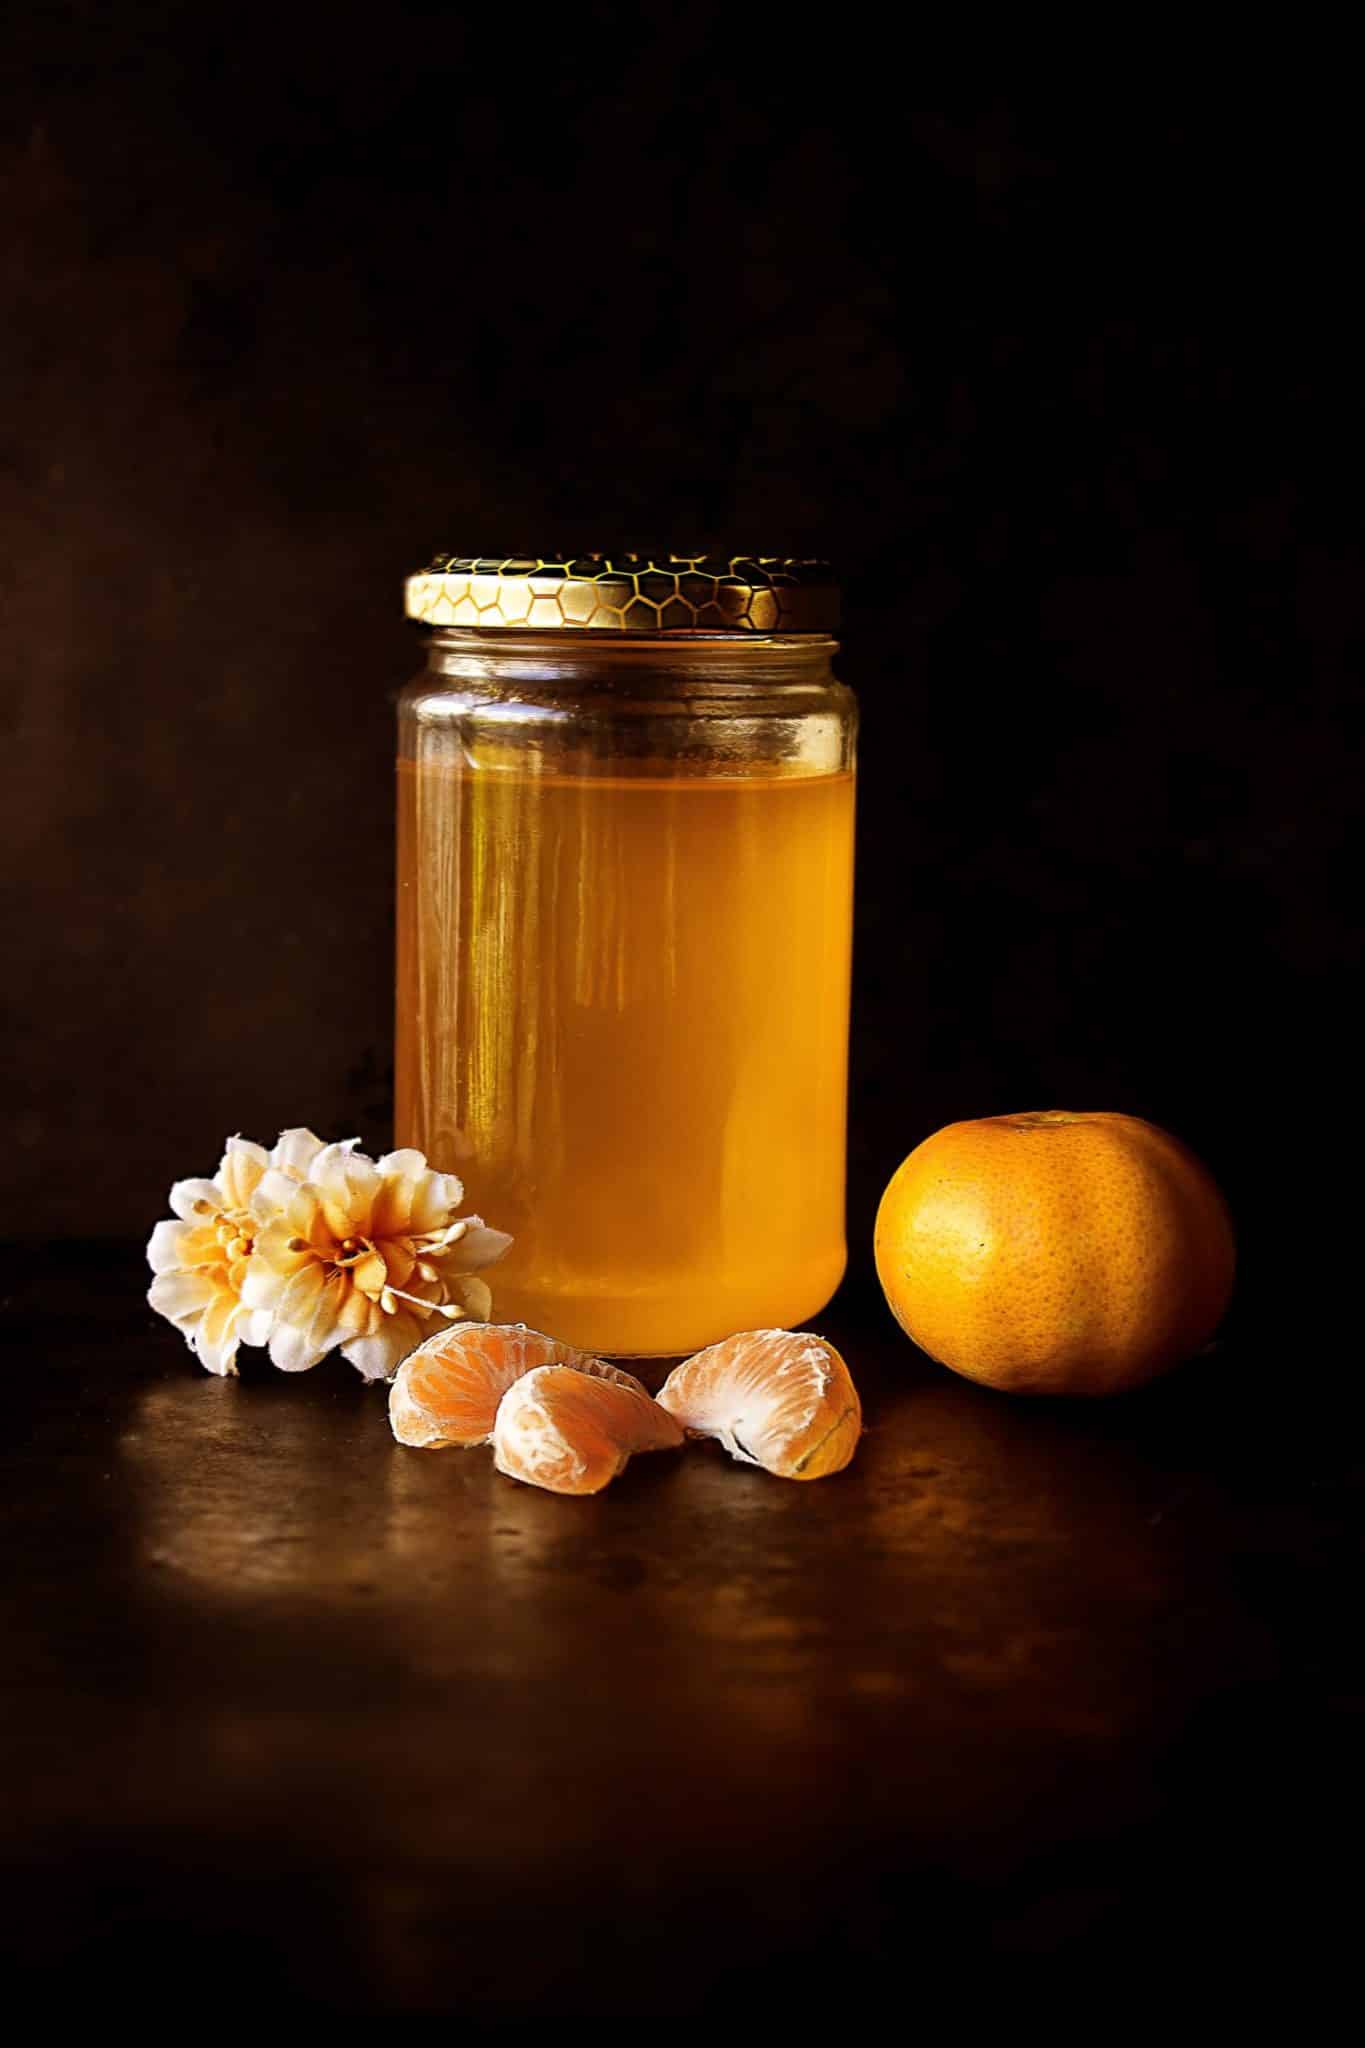 Honey in a jar, clementine, and a flower